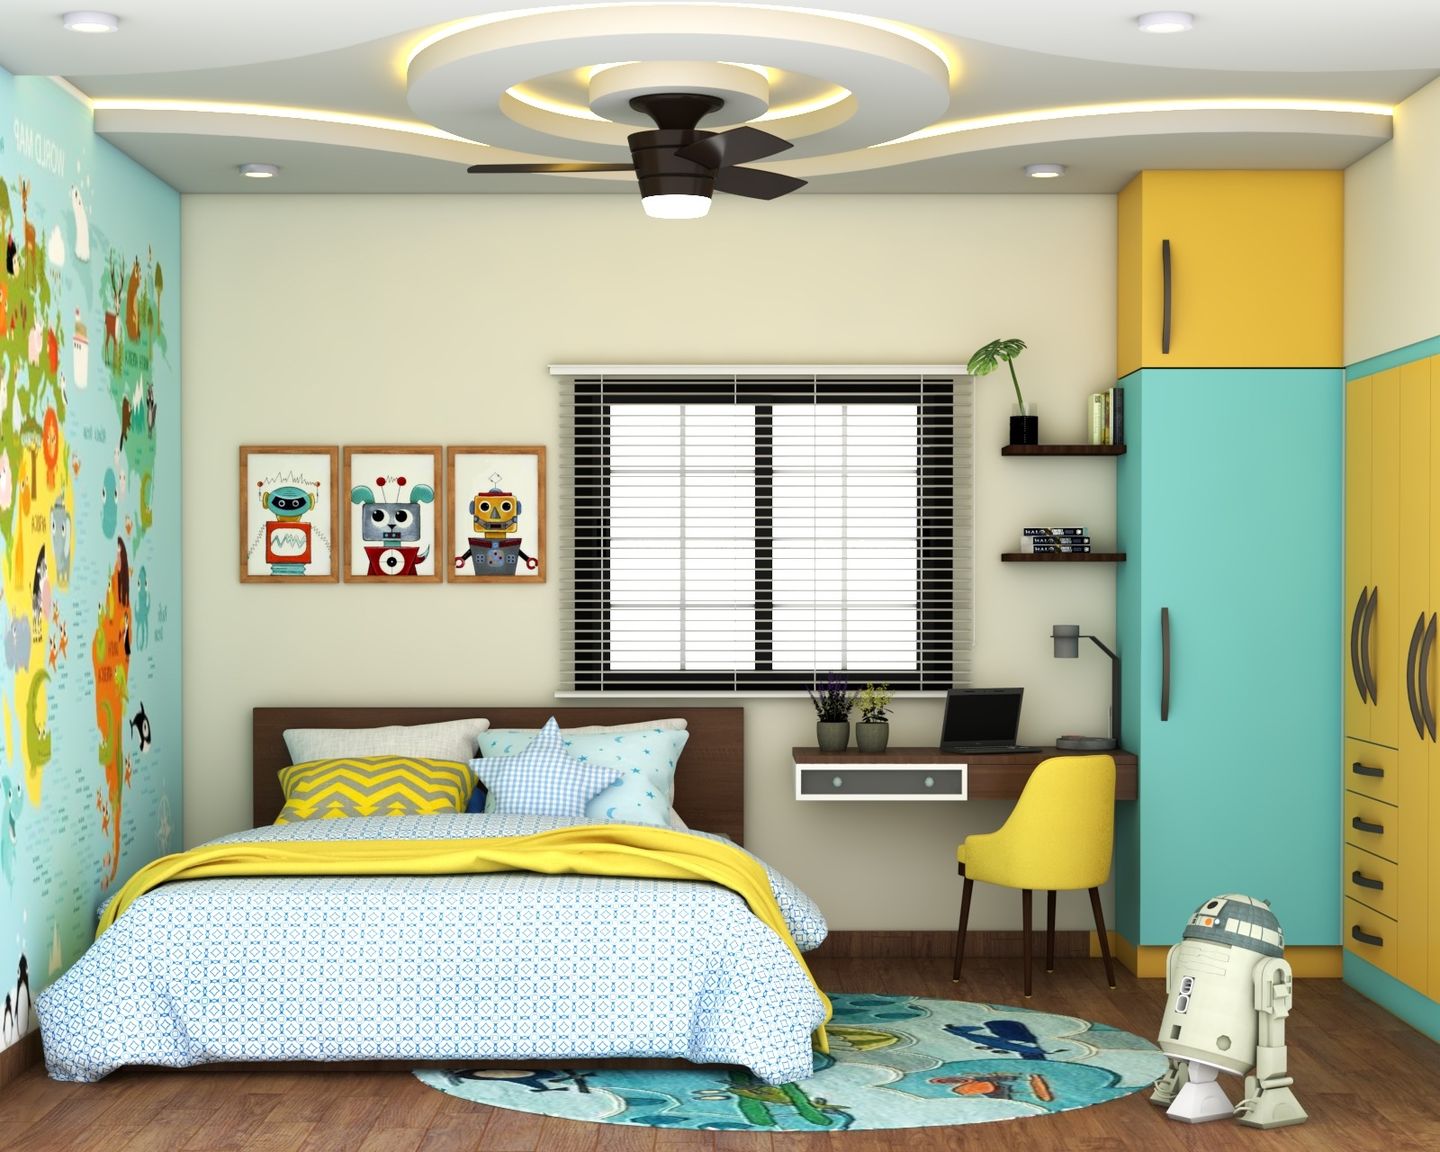 Contemporary Bedroom Design With Yellow And Blue Interiors - Livspace